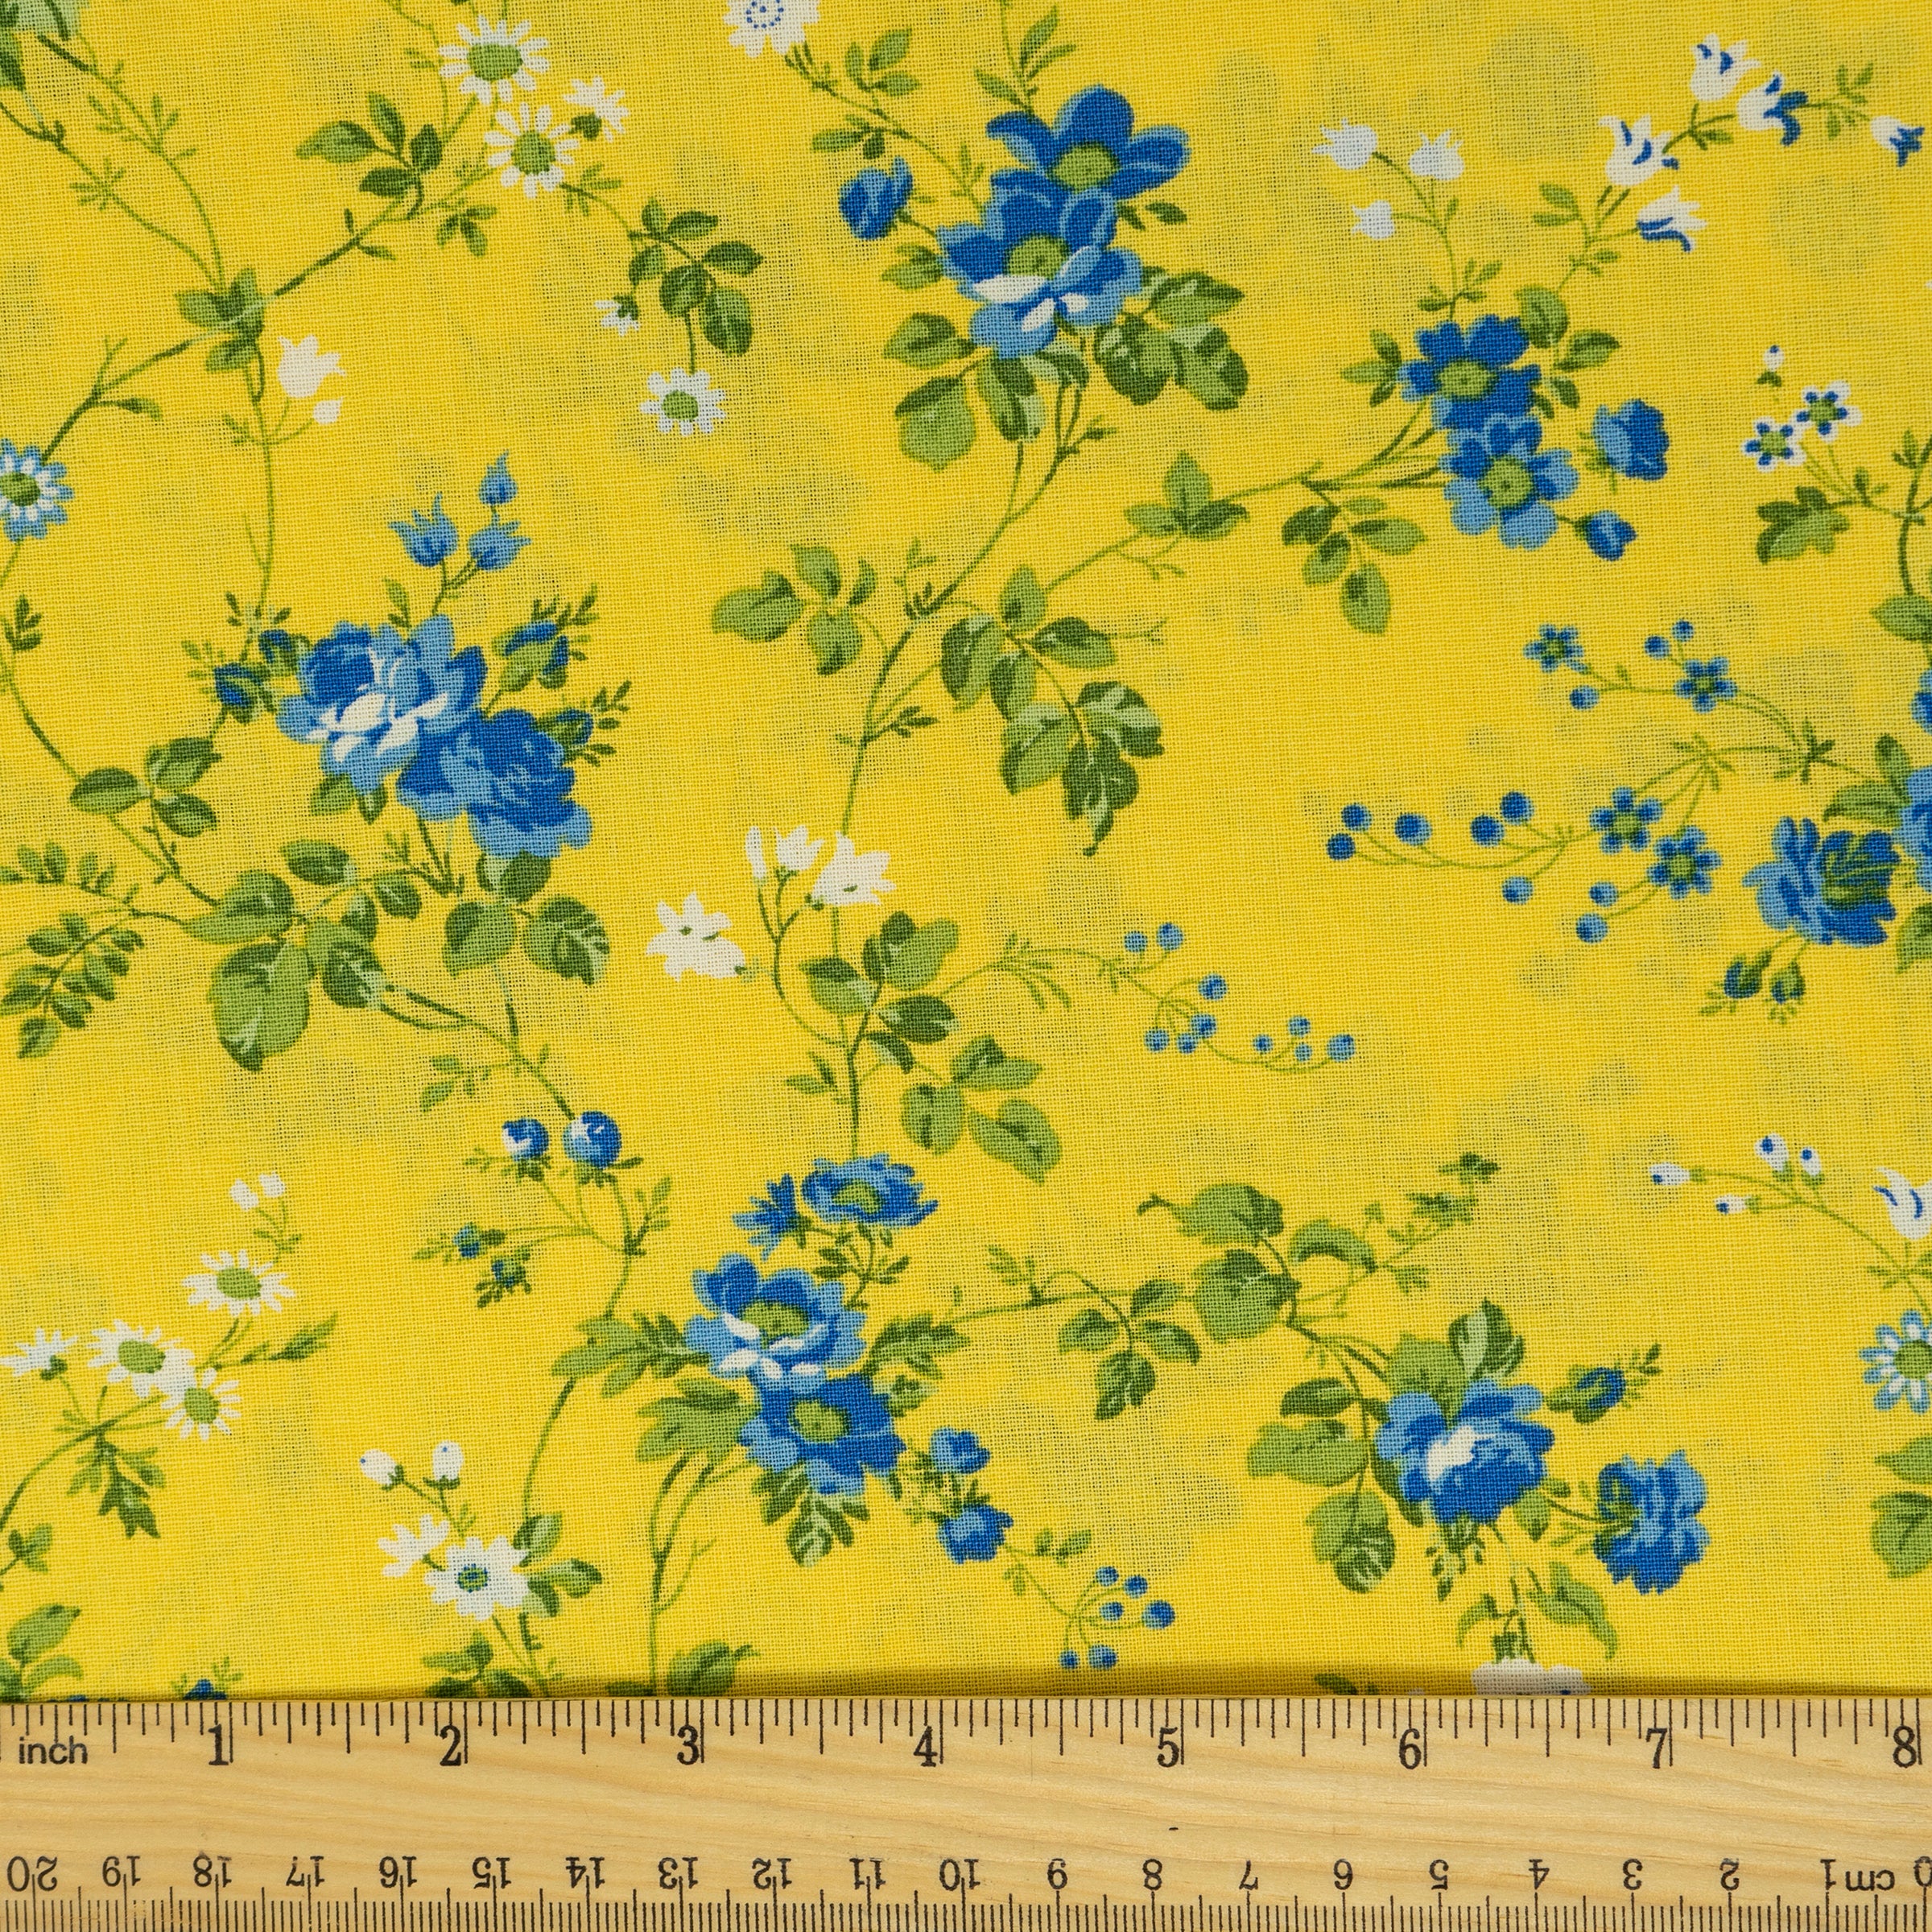 Waverly Inspirations 44" 100% Cotton Charlotte Vine Sewing & Craft Fabric By the Yard, Blue, Yellow and Green